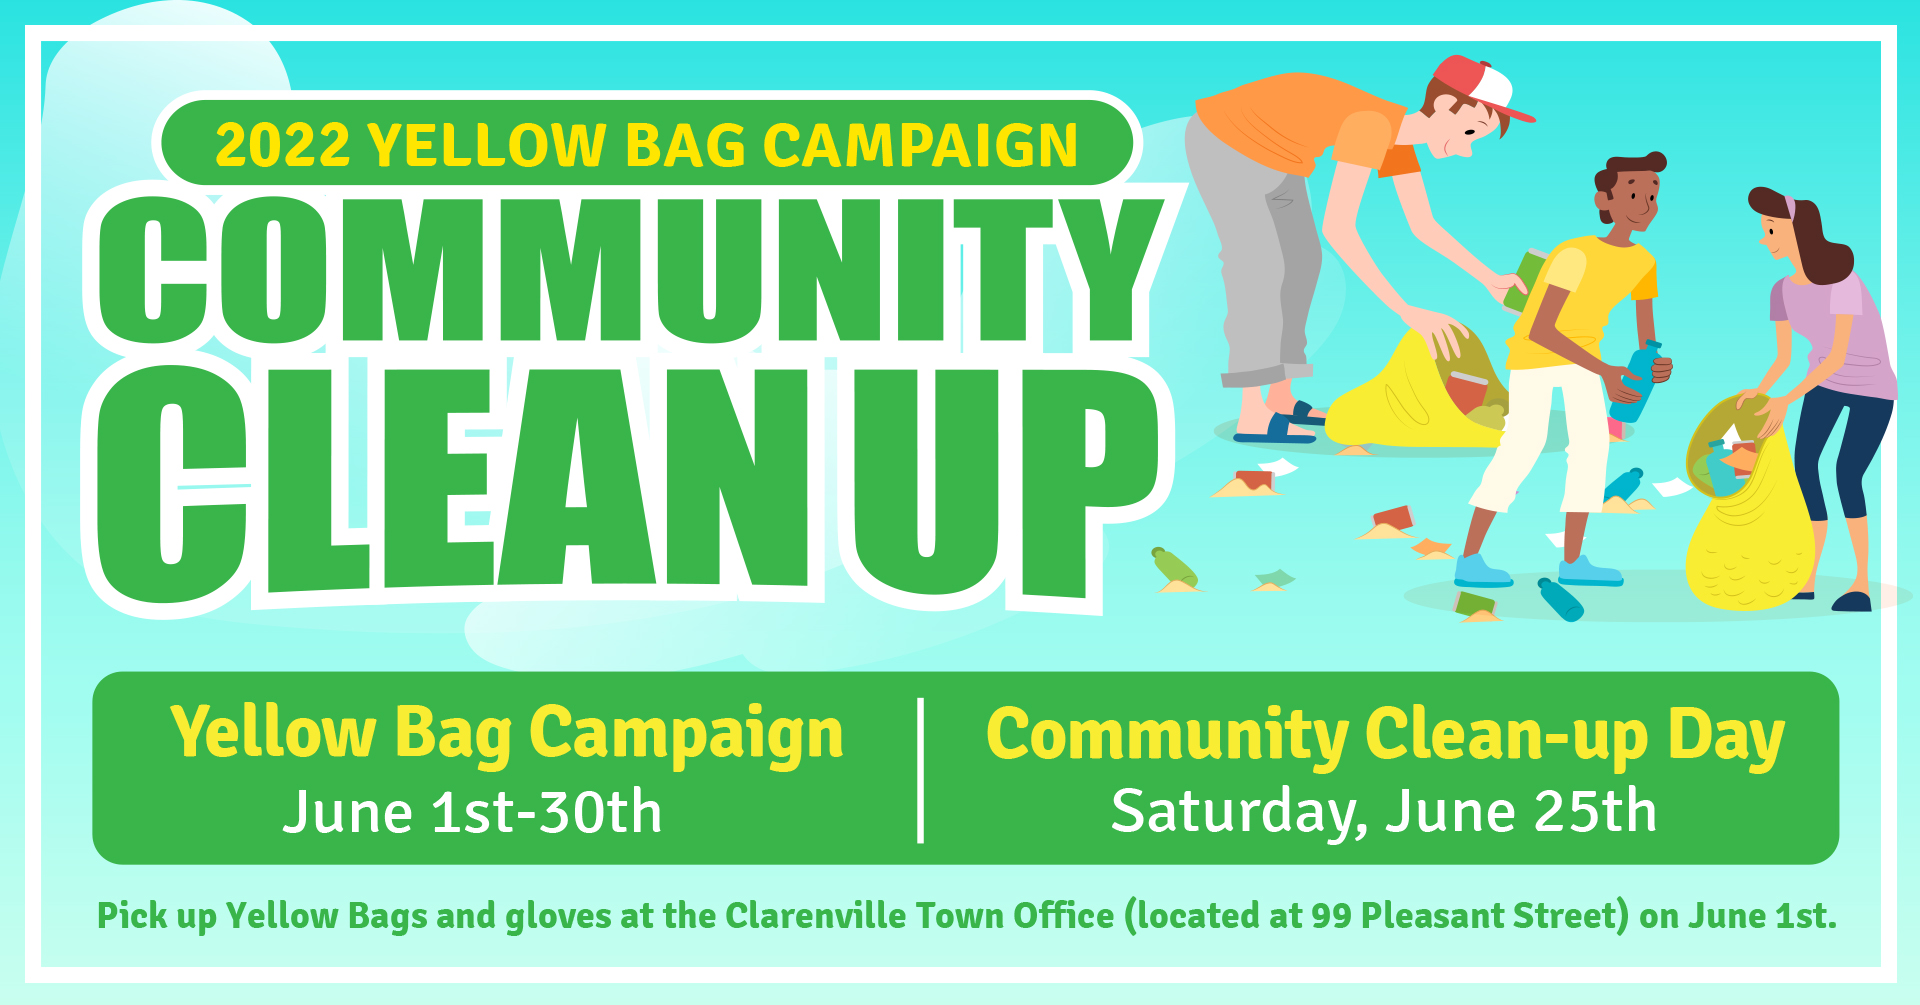 Community Clean-up Day